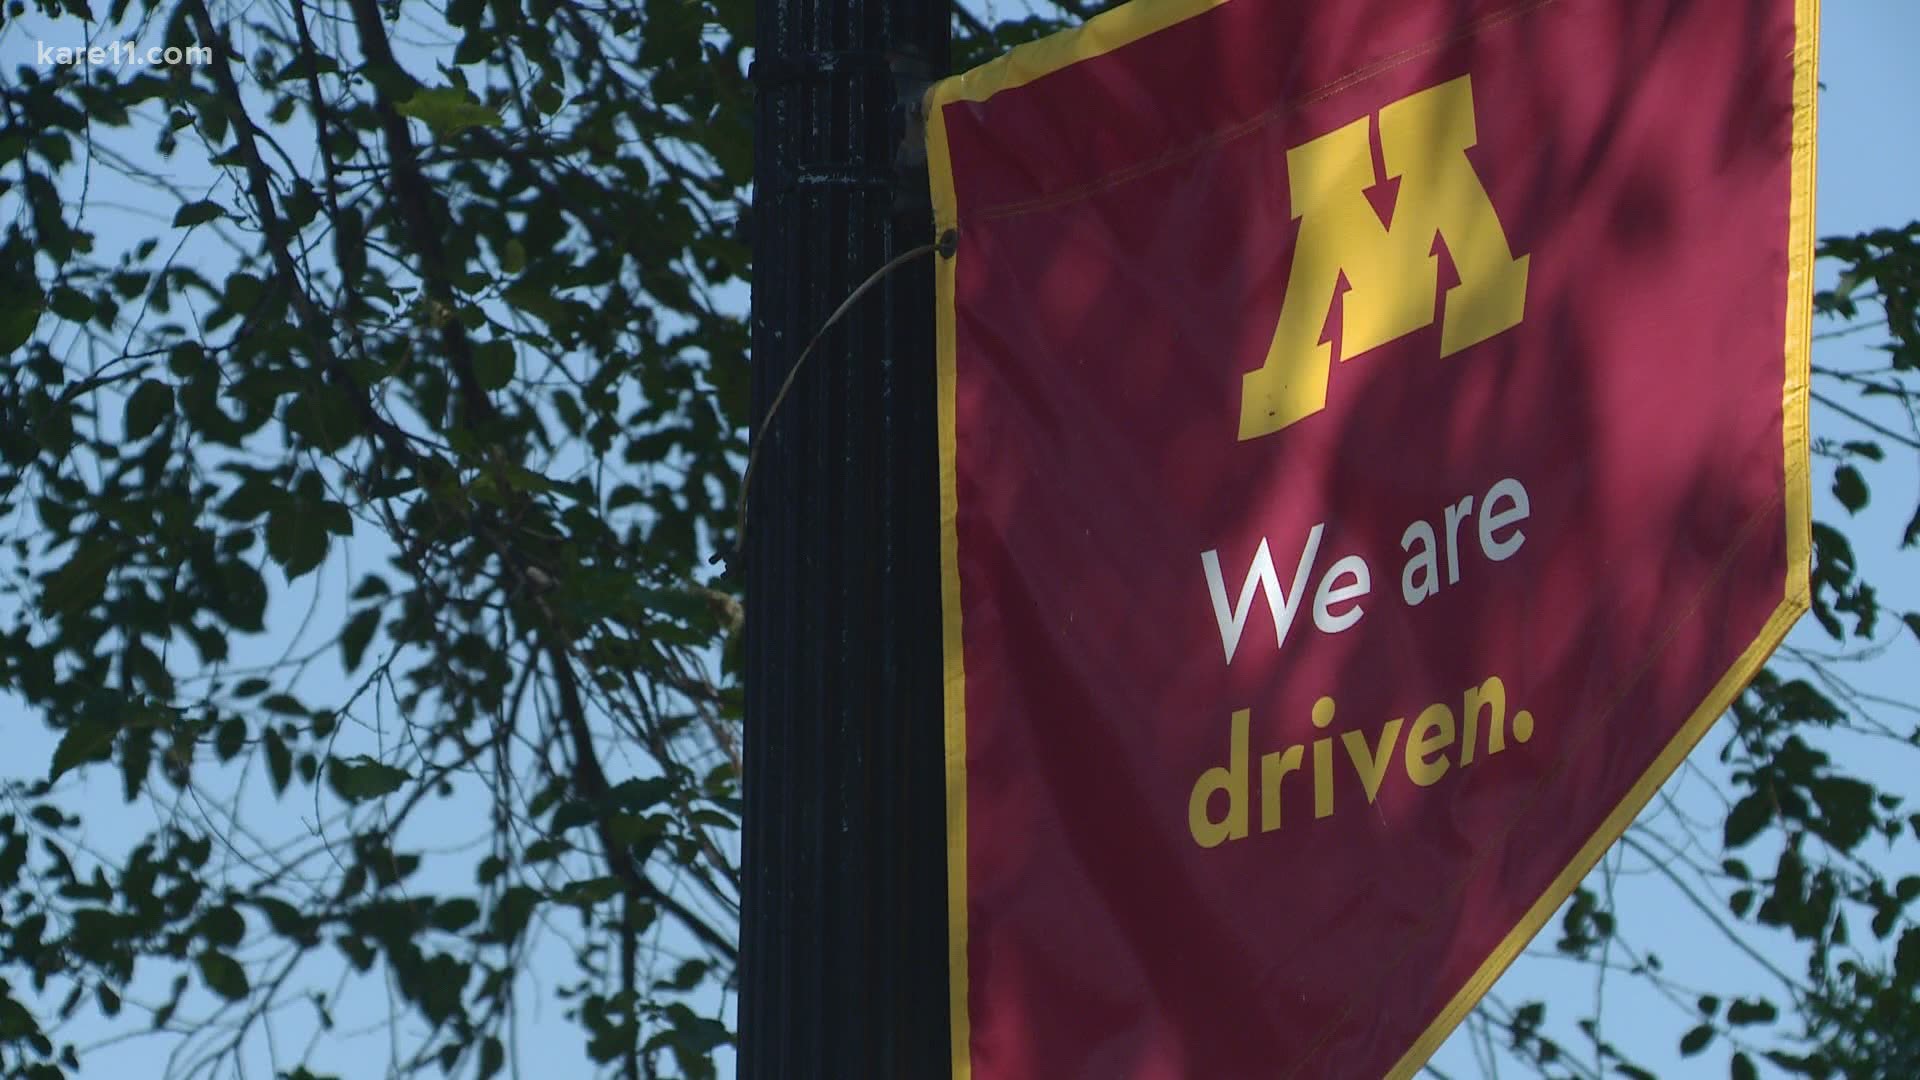 The University of Minnesota Board of Regents voted 8-3 to delay students moving into the dorms by two weeks and hold all classes online for at least two weeks.